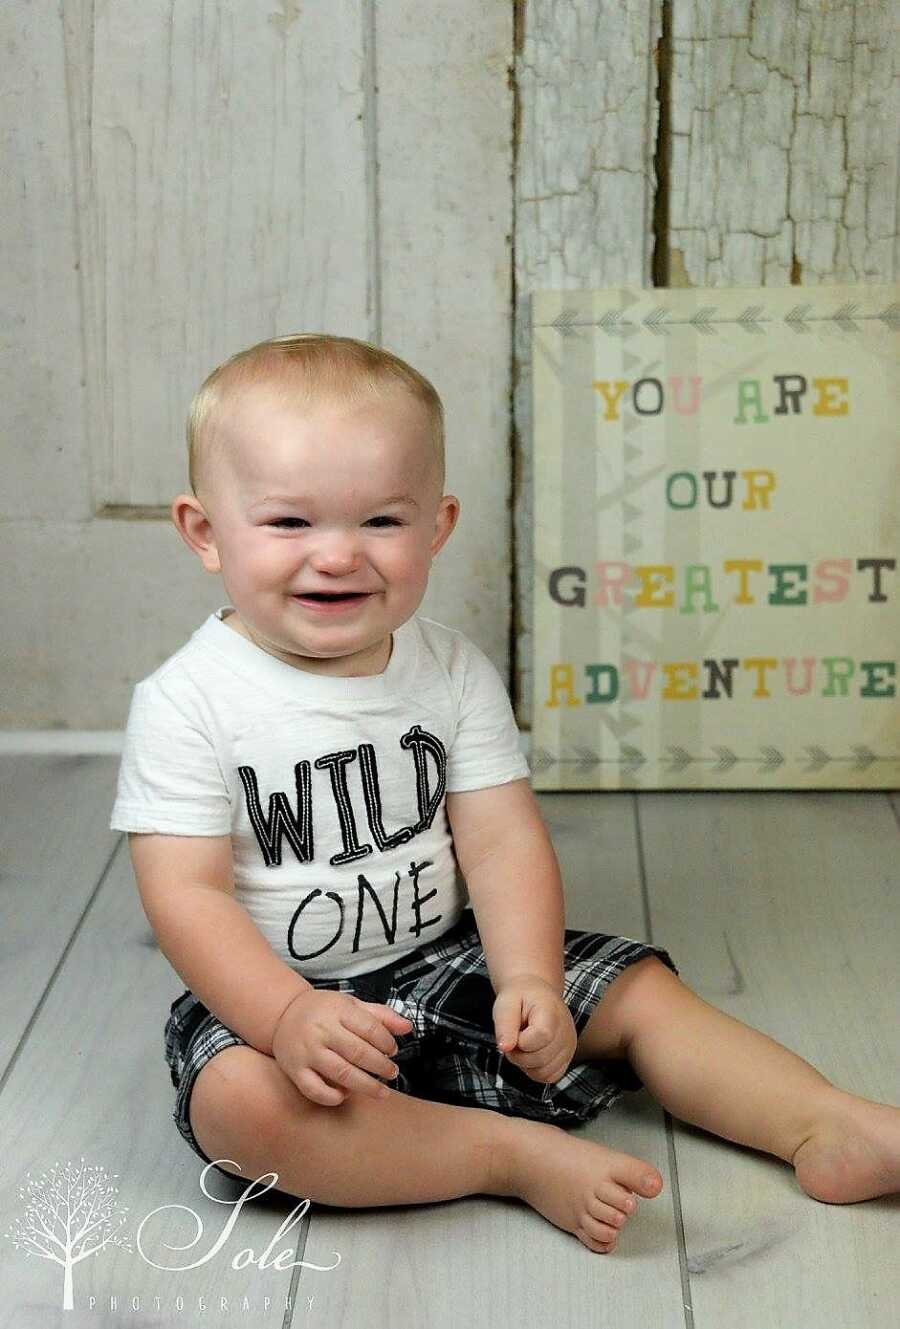 baby boy smiling wearing a white shirt that says 'Wild One' and a sing in the back that says 'you are our greatest adventure'